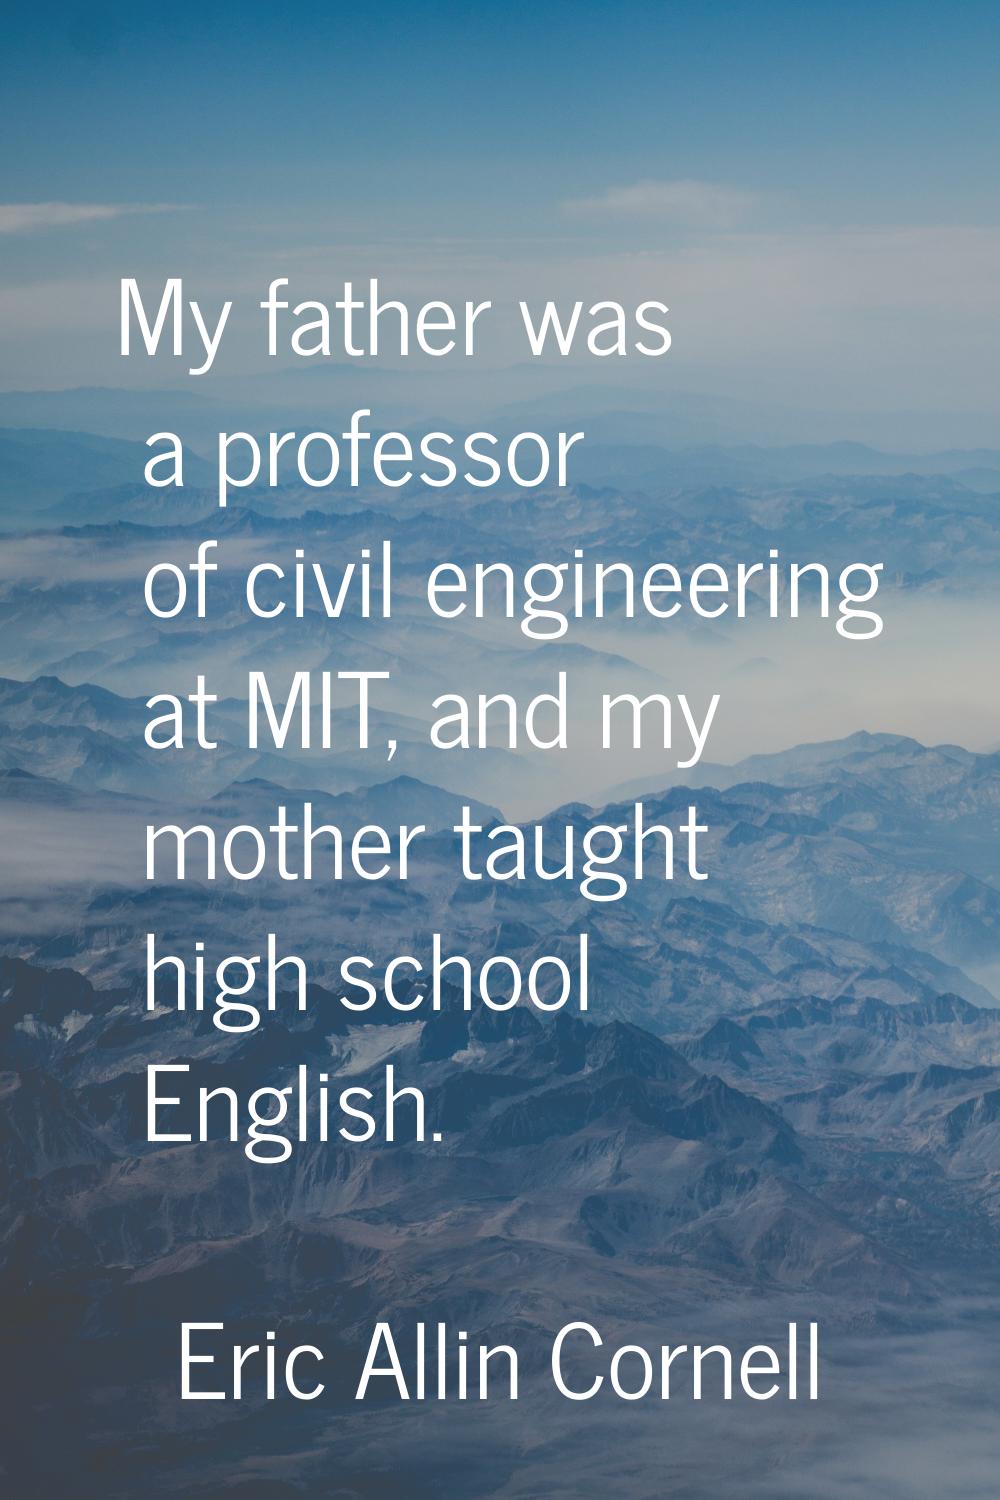 My father was a professor of civil engineering at MIT, and my mother taught high school English.